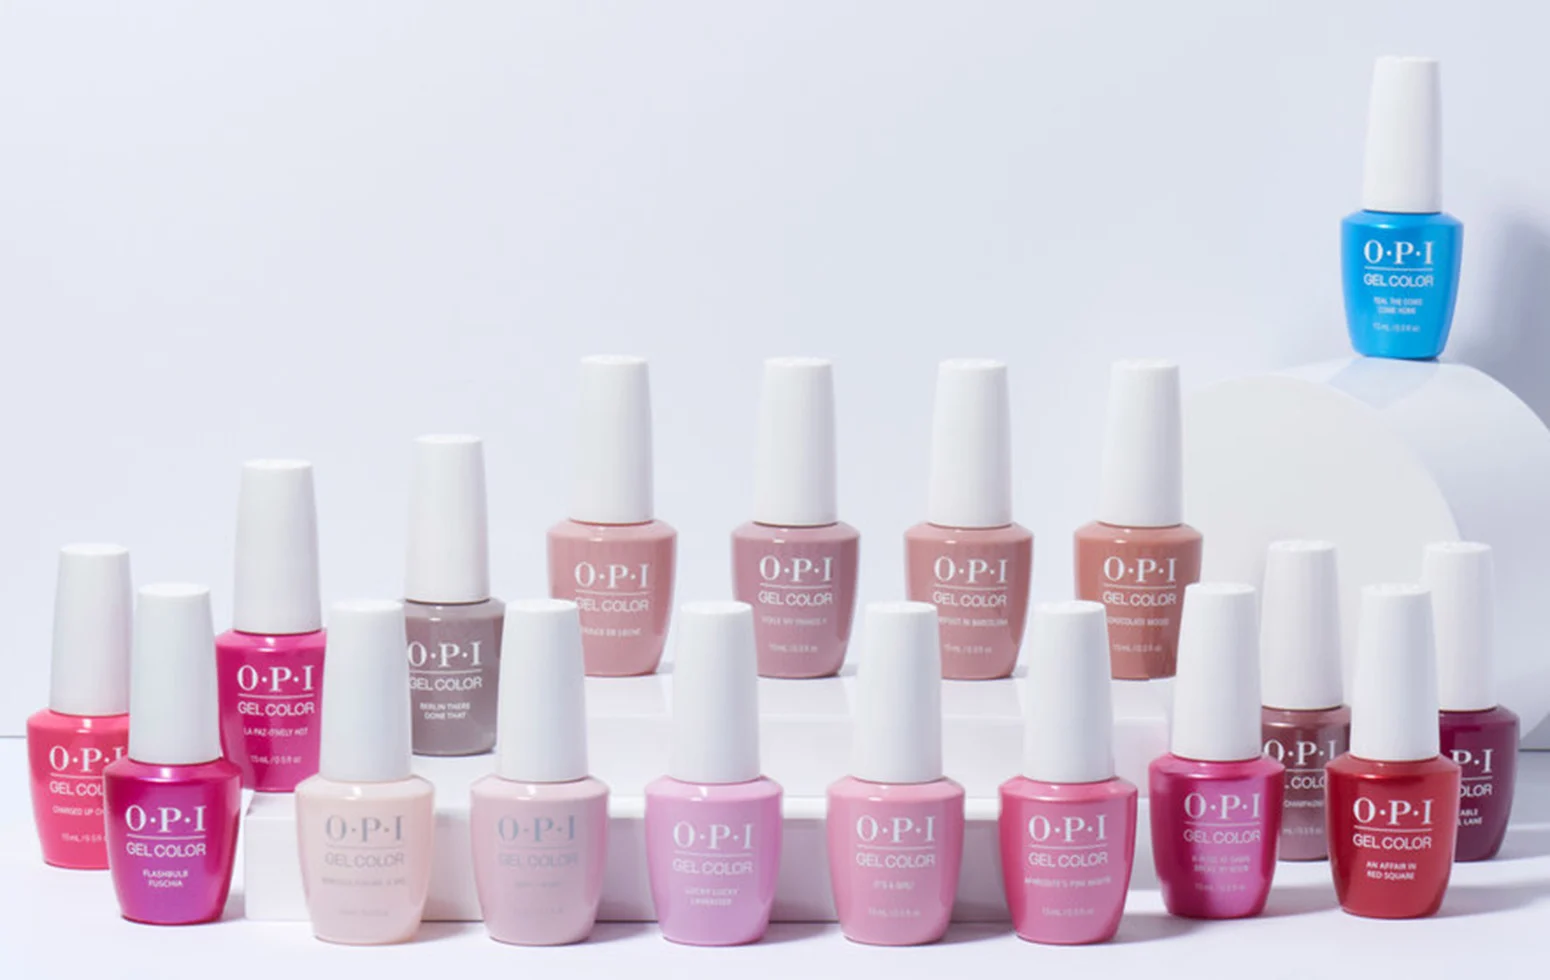 Get Ready for more GelColor shades! 23 new Iconic OPI Colors now available